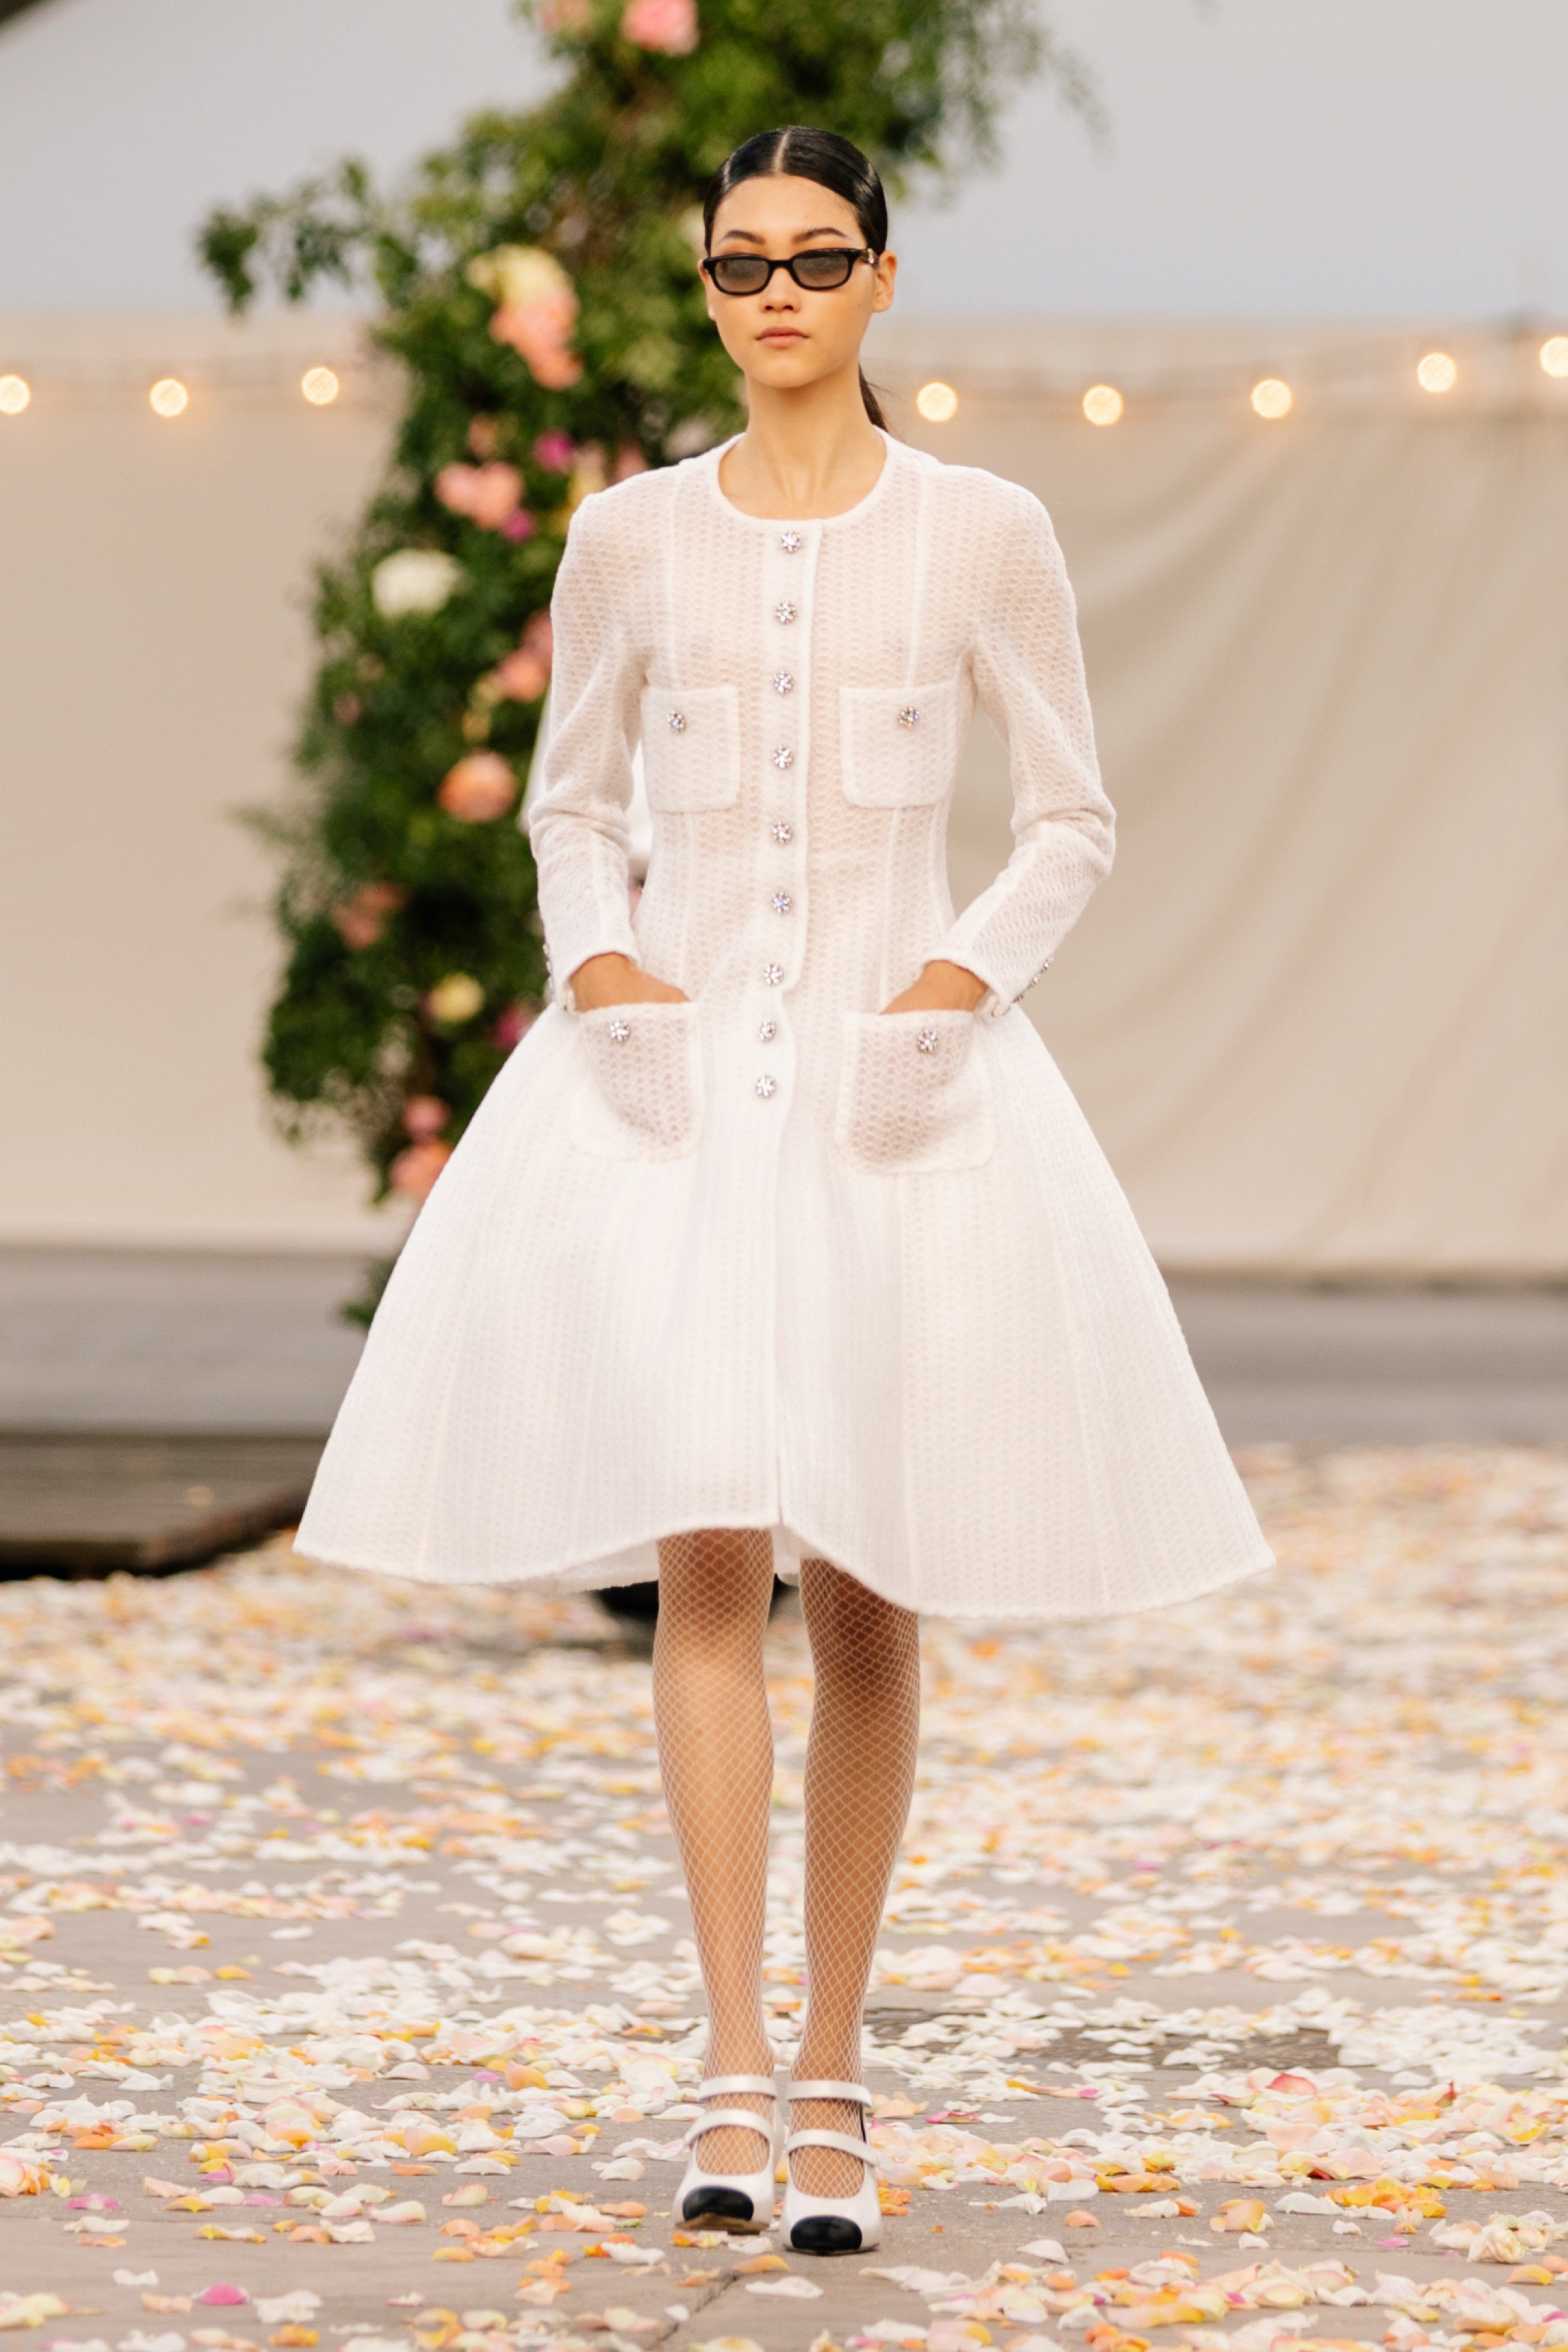 Chanel's Romantic Couture Collection Has Us Dreaming Of A Garden Wedding